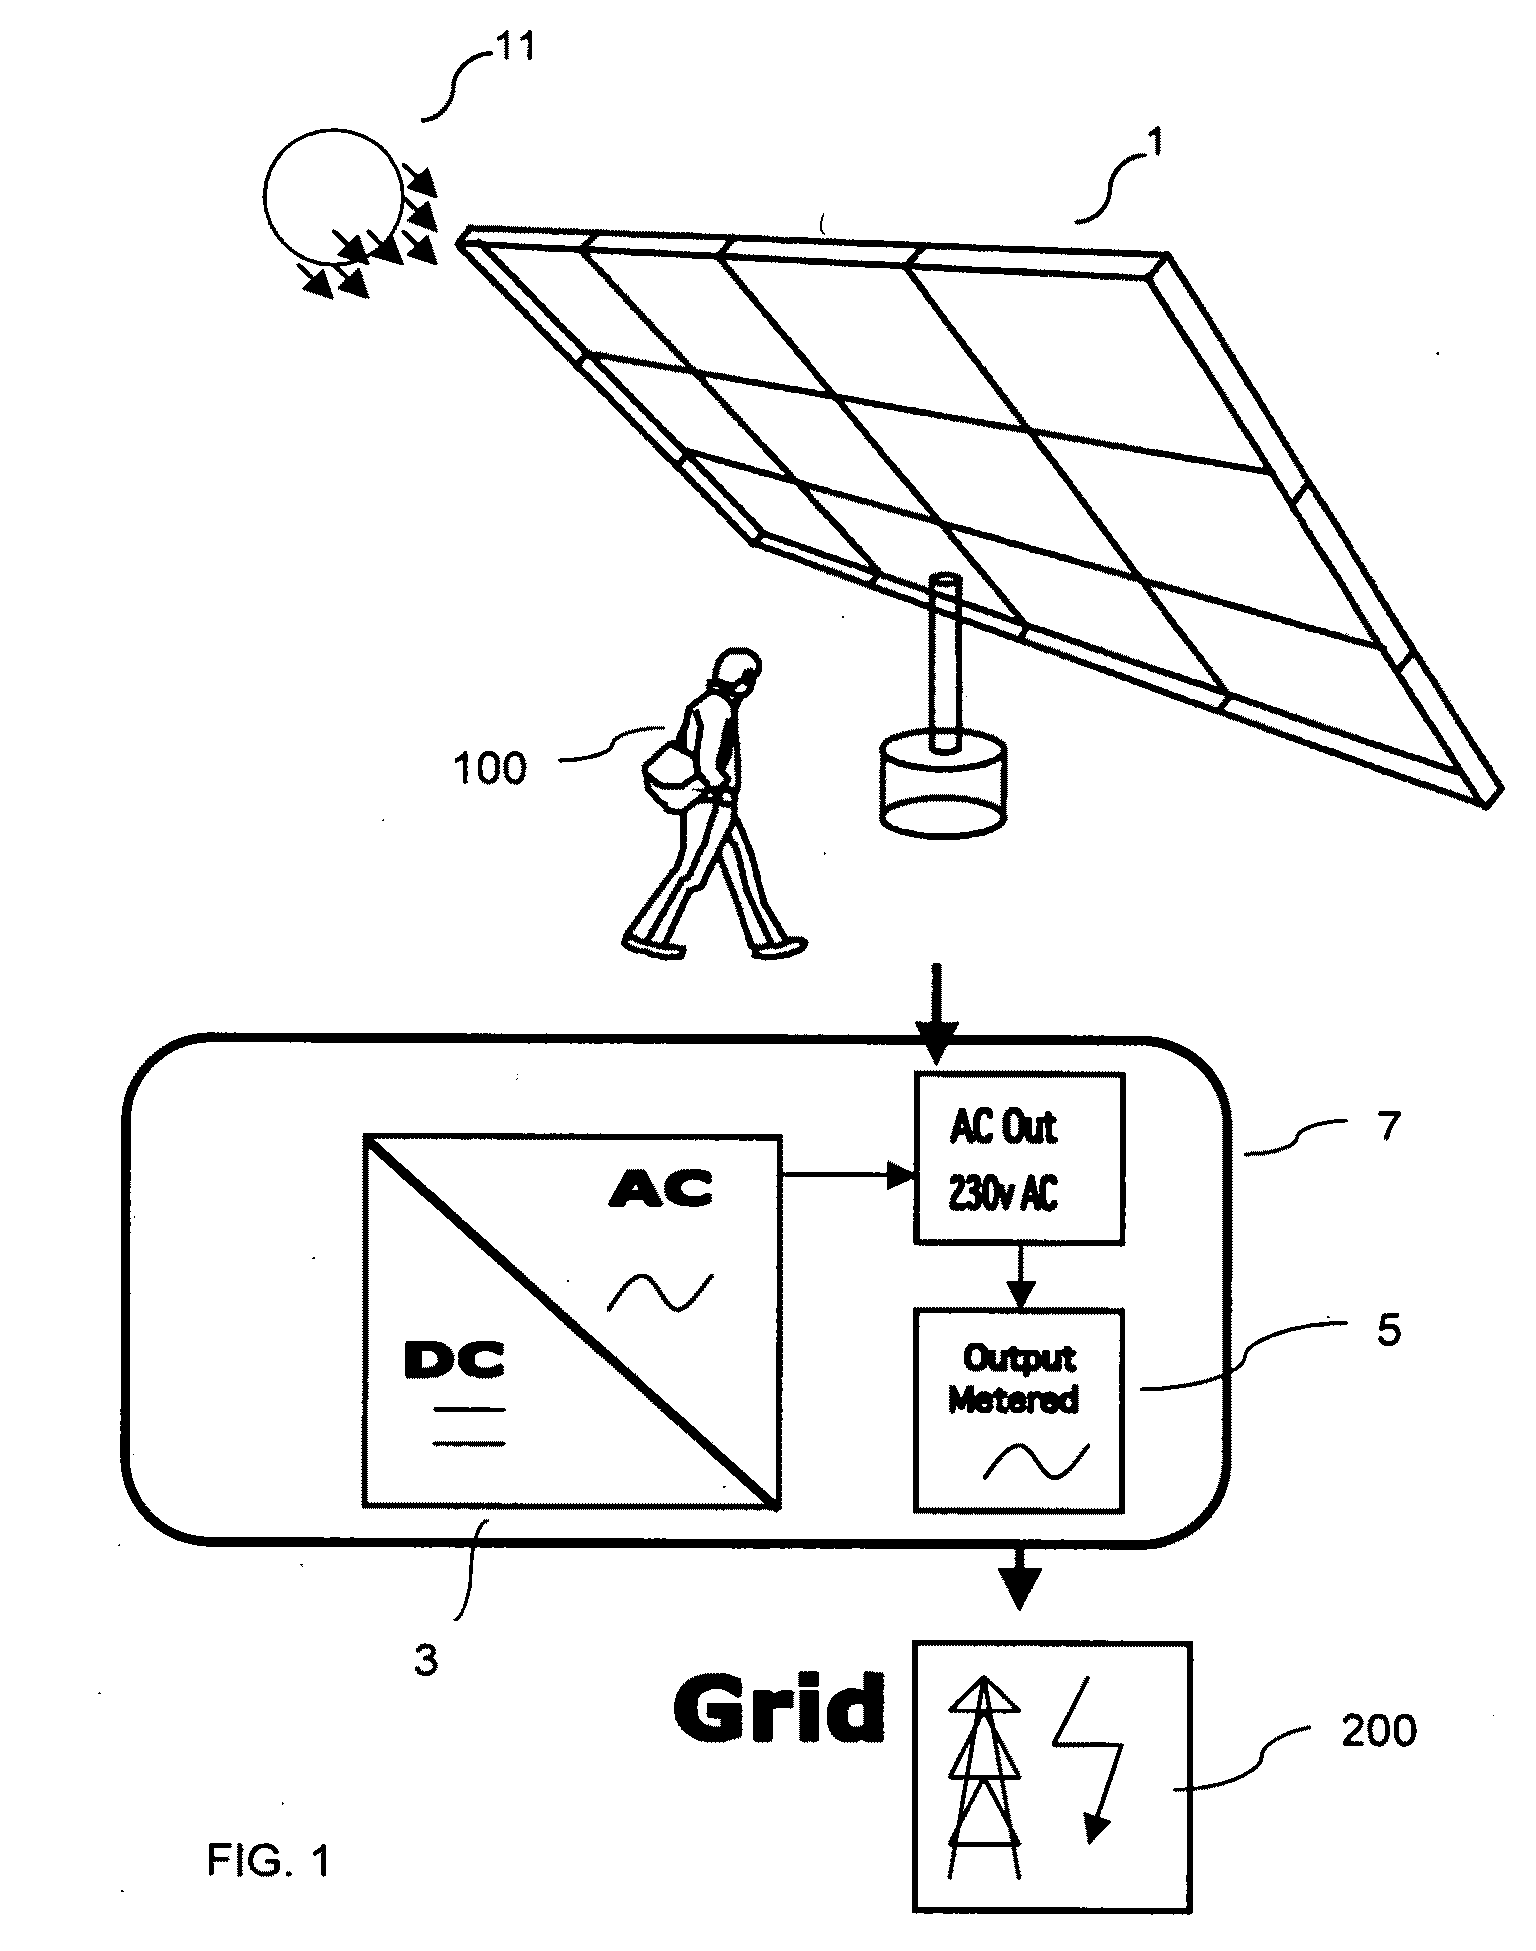 Method and system for remote generation of renewable energy